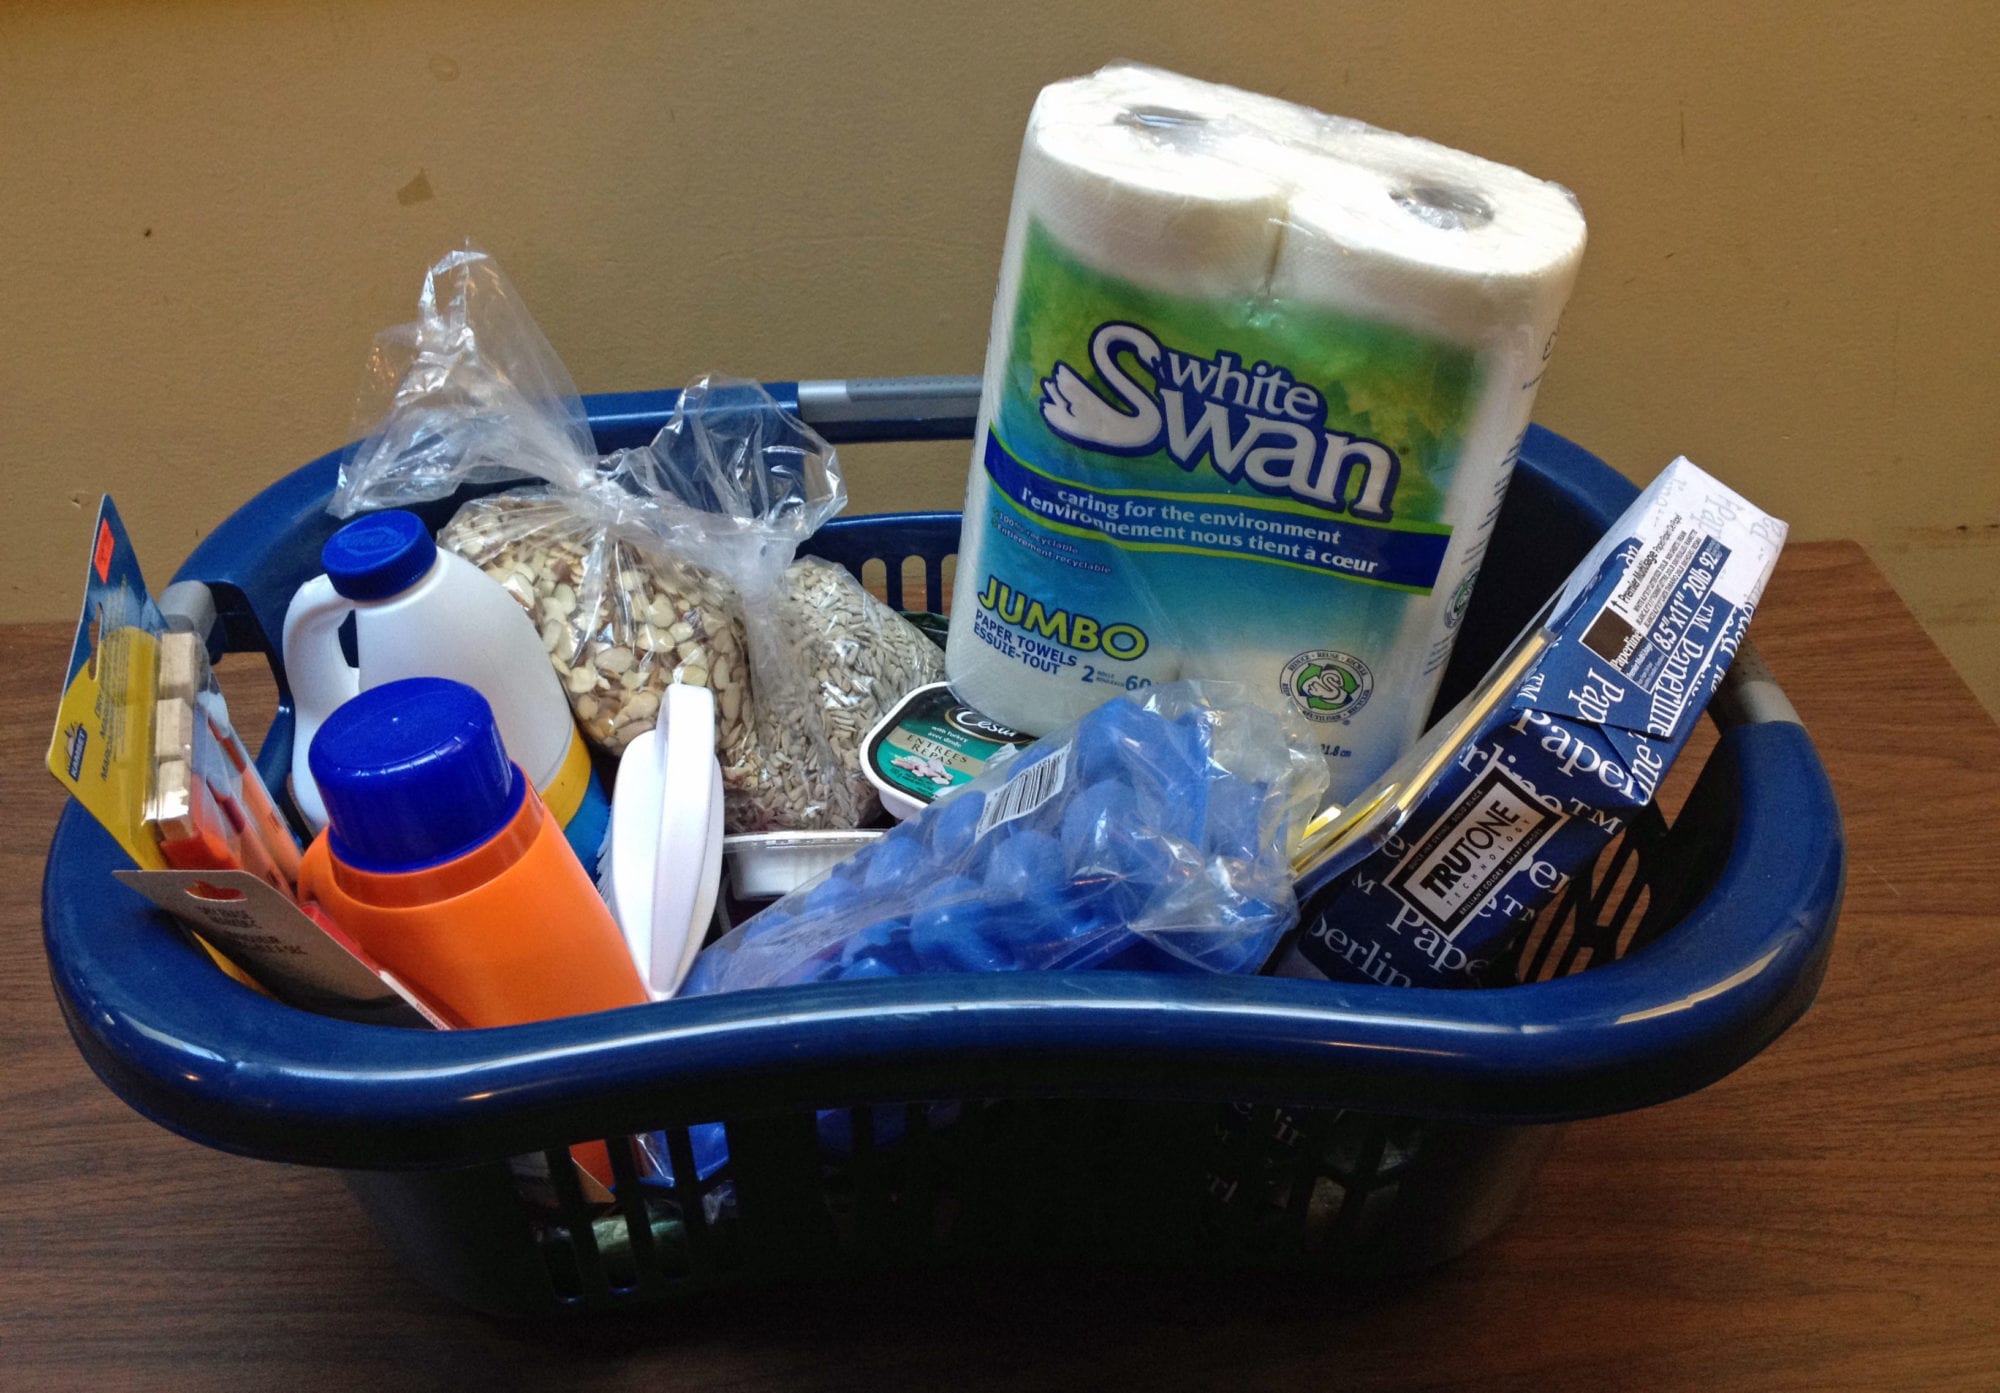 A basket of donated items from a supporter